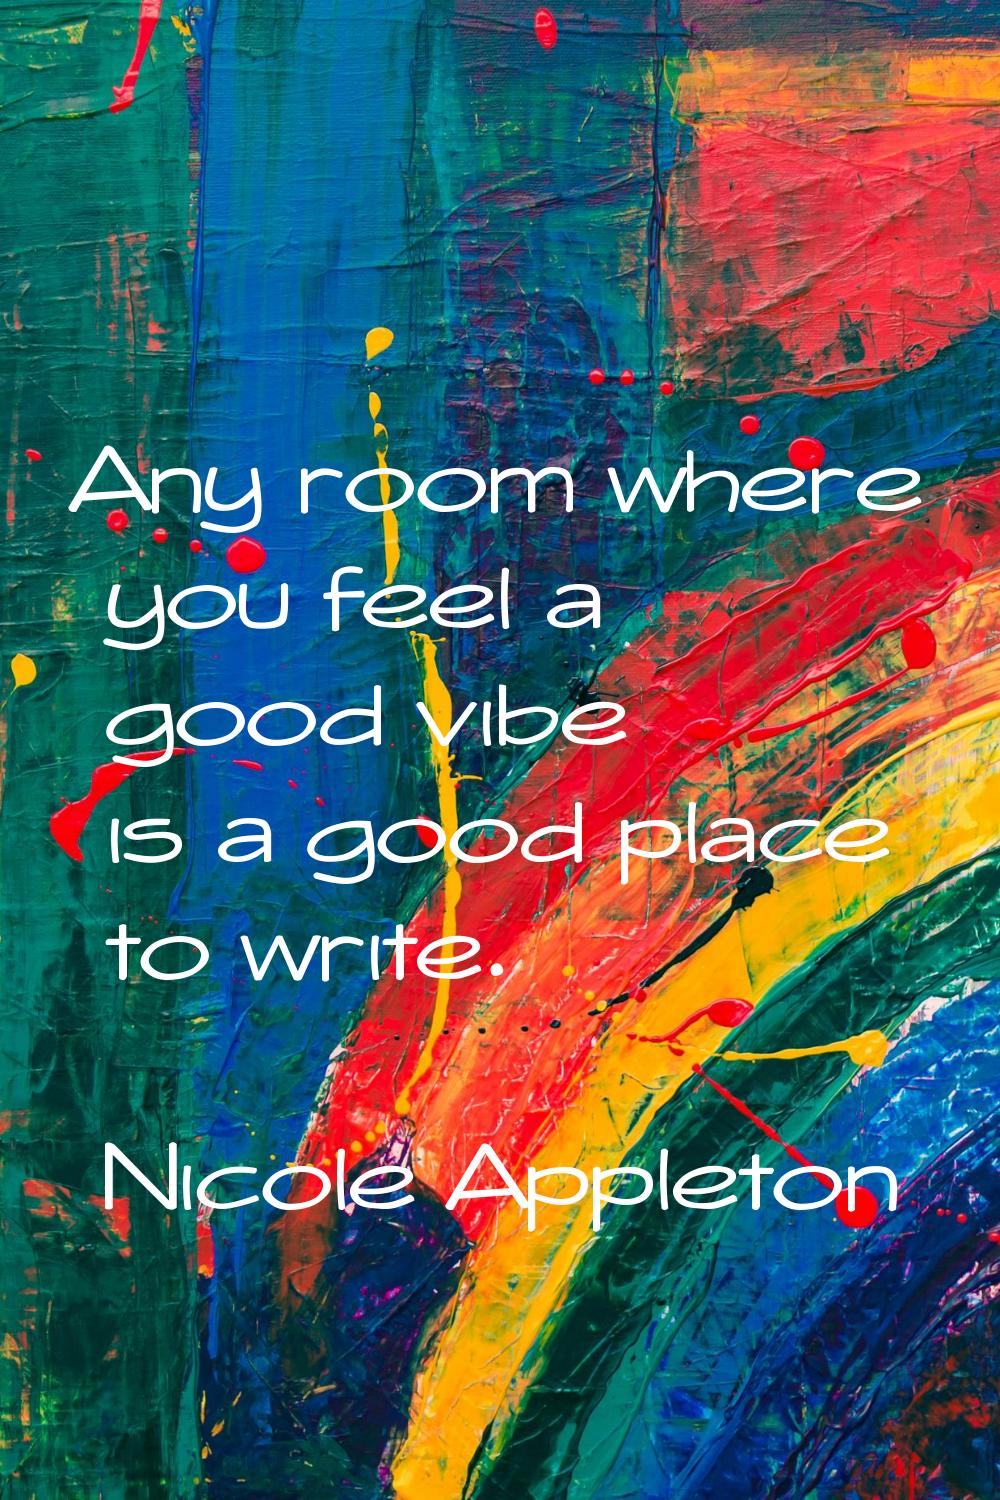 Any room where you feel a good vibe is a good place to write.